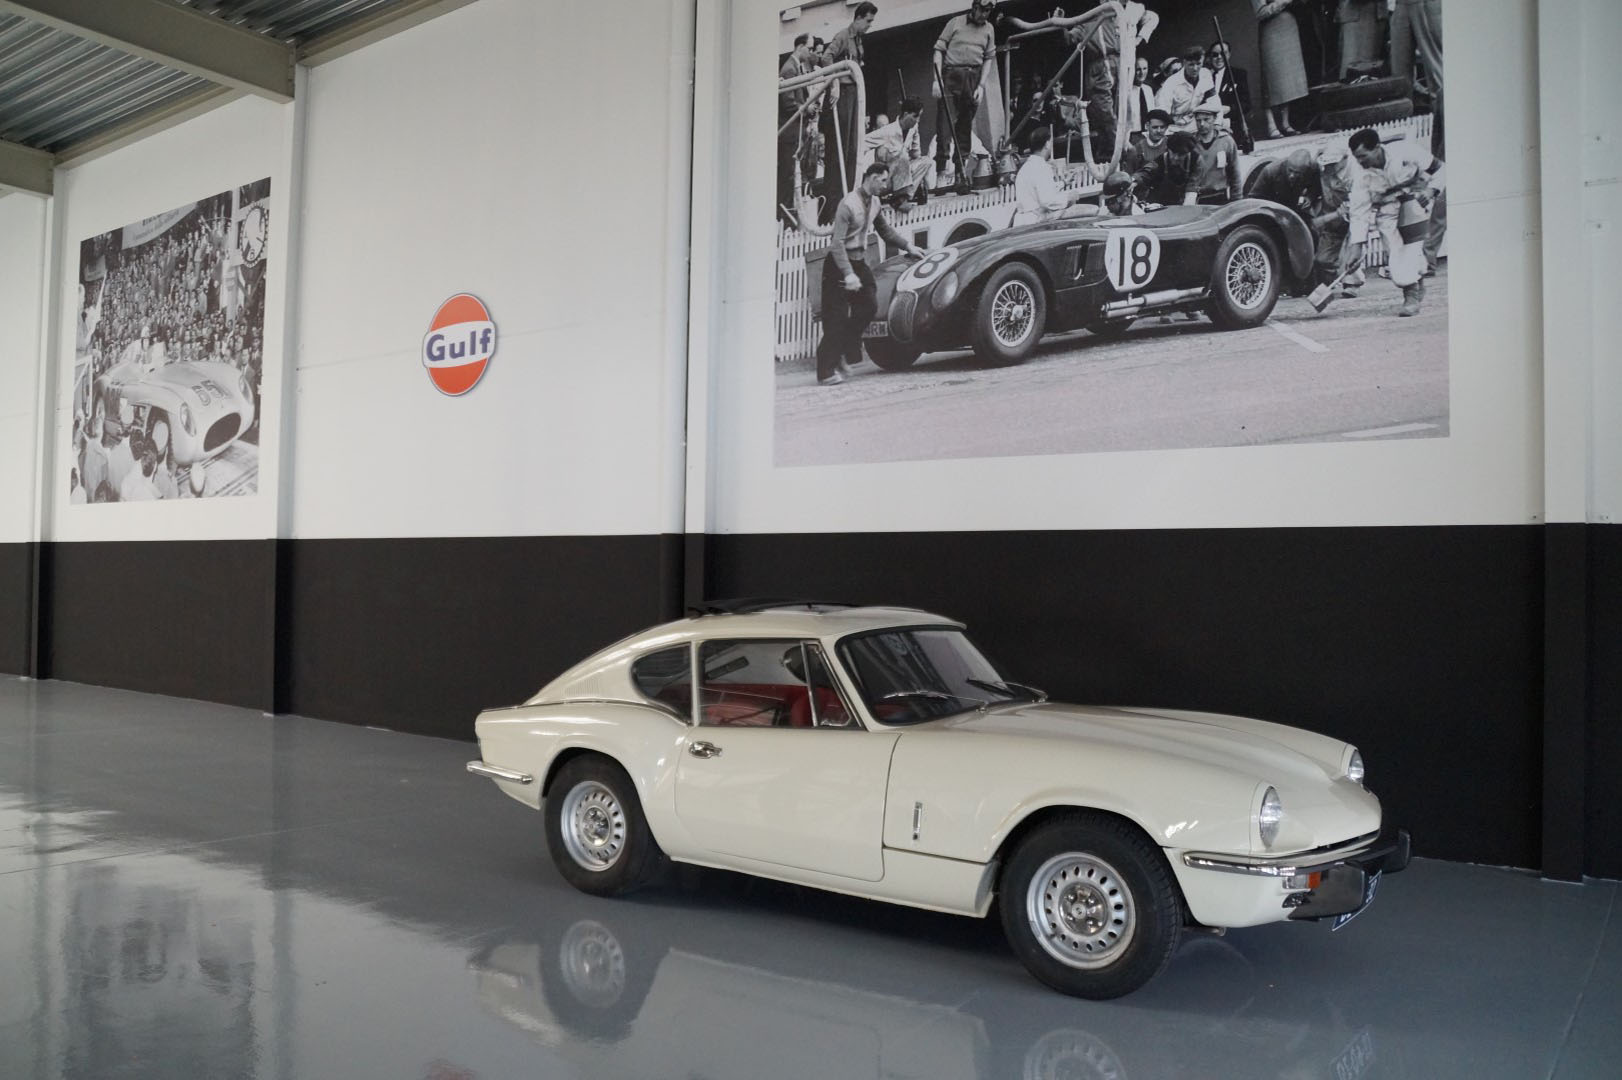 Buy this Triumph GT6  Mark 3 Coupe   at Legendary Classics